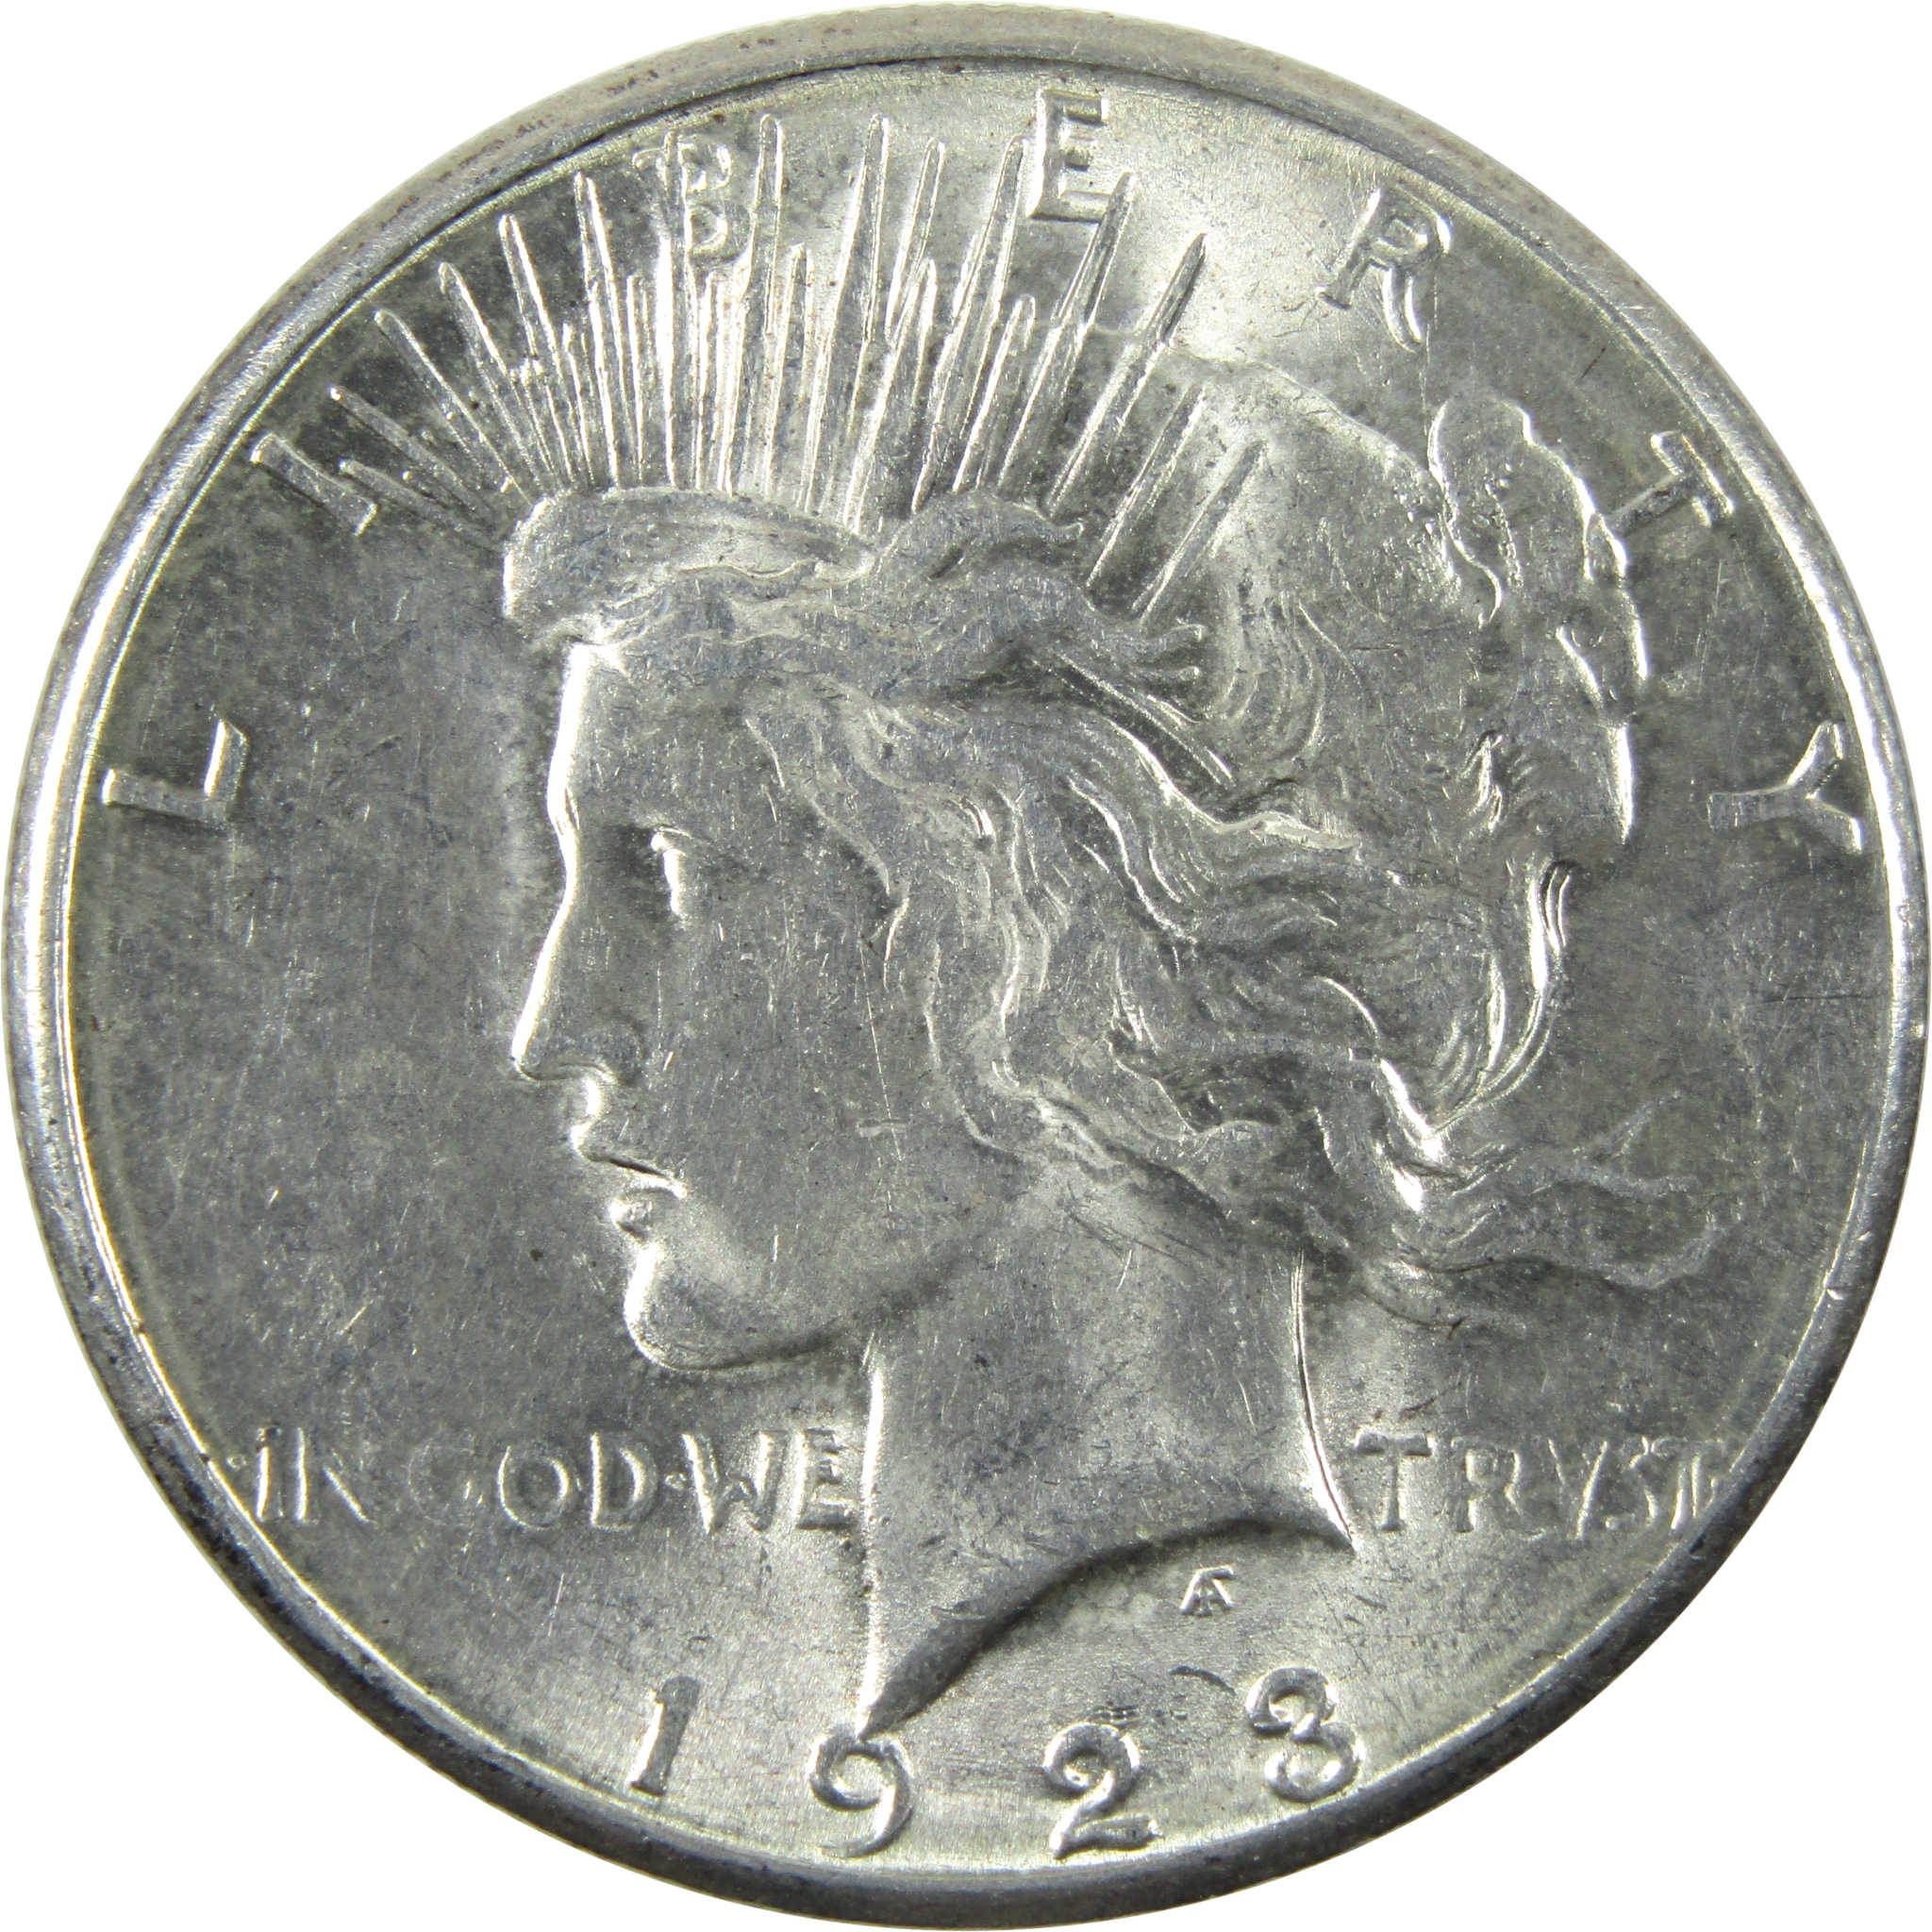 1923 S Peace Dollar AU About Uncirculated Silver $1 Coin SKU:I14104